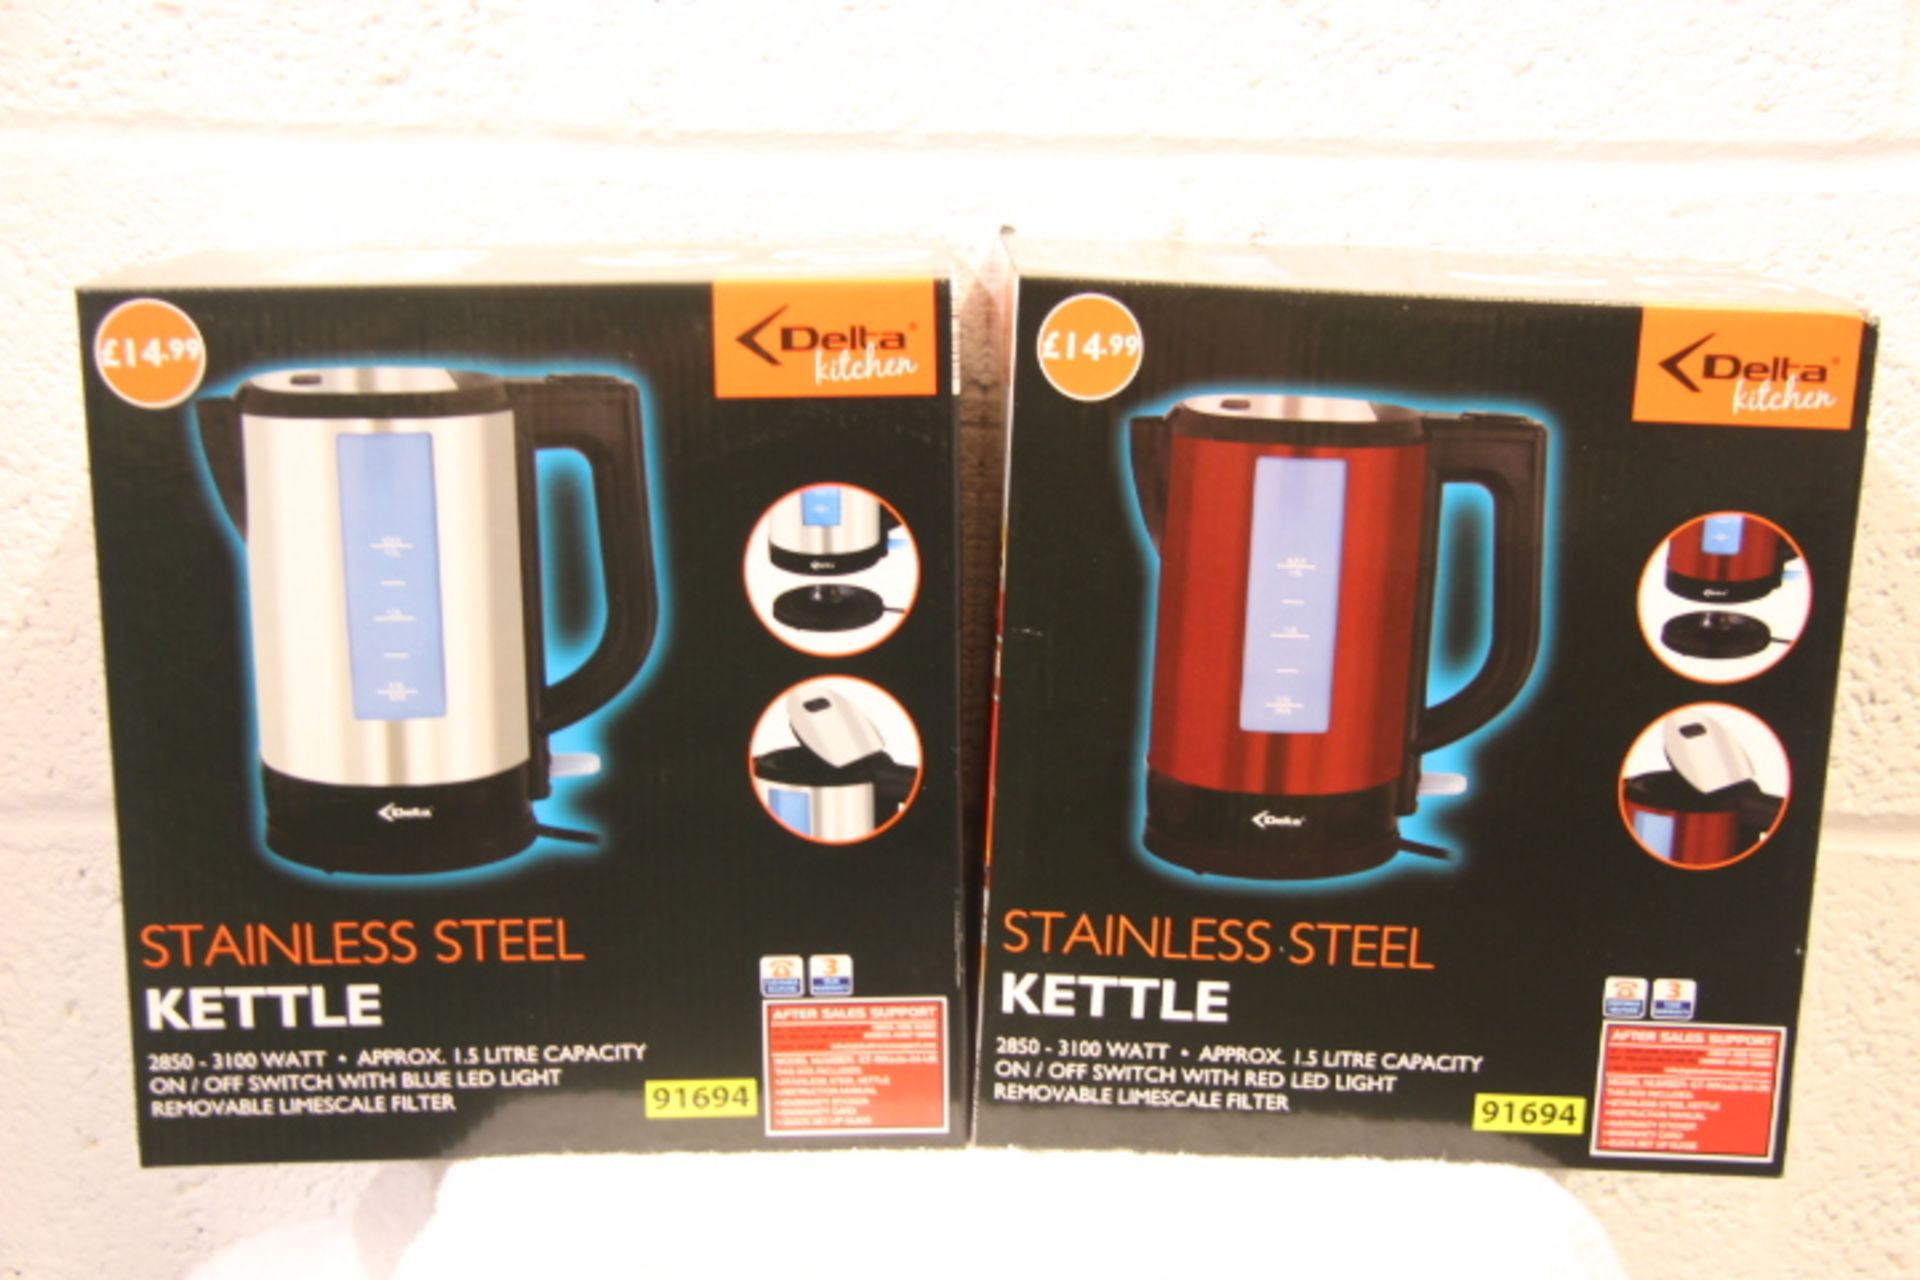 V Brand New Delta Kitchen 2850-3100w 1.5 Litre Stainless Steel Kettle X 2 YOUR BID PRICE TO BE